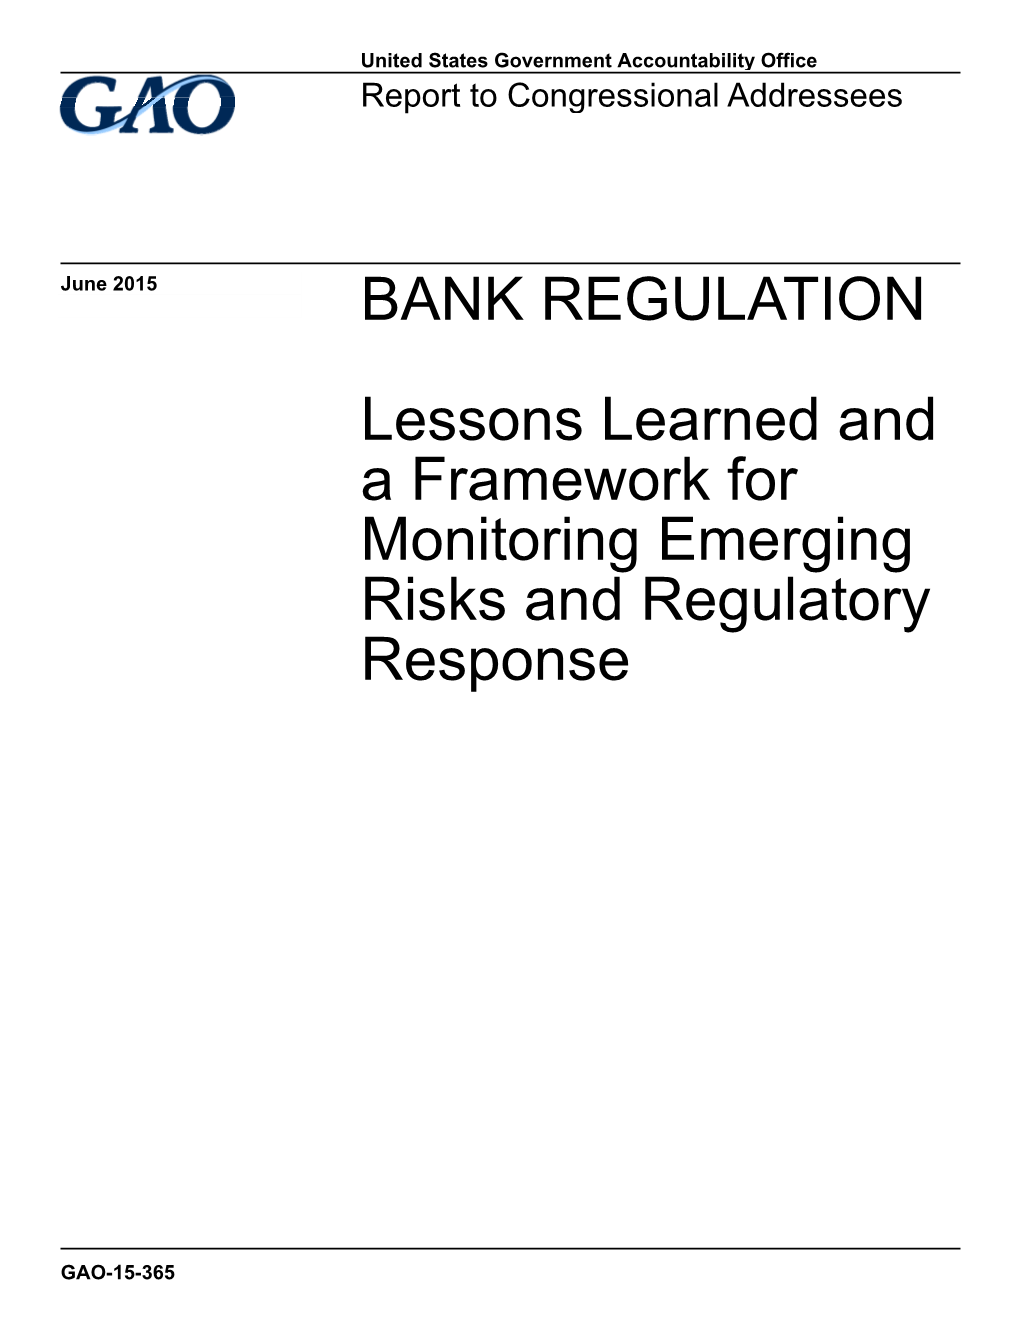 GAO-15-365, Bank Regulation: Lessons Learned and a Framework